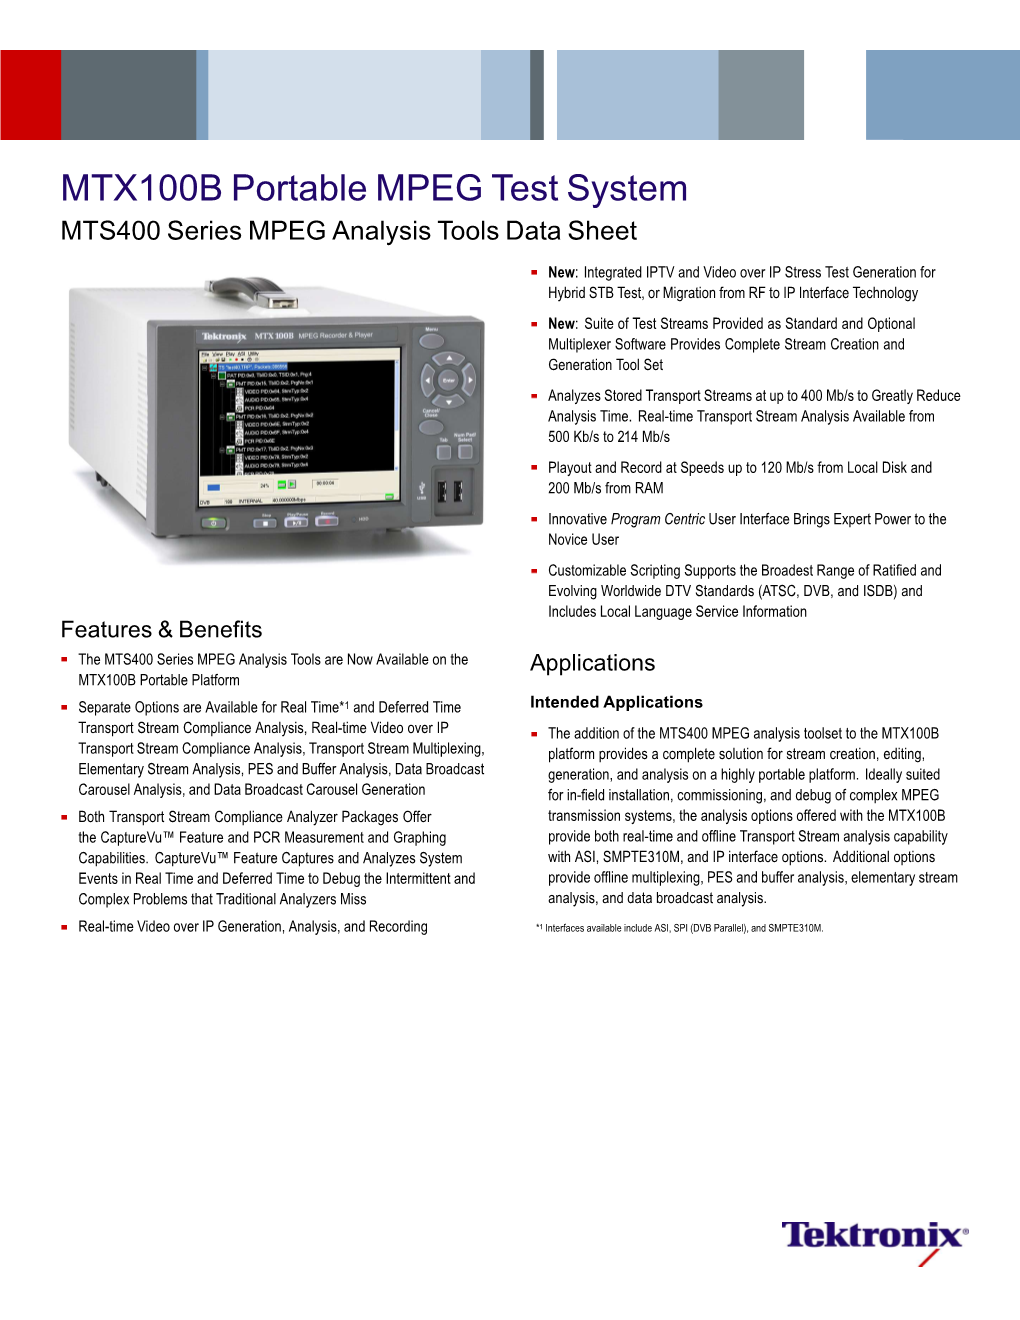 MTX100B Portable MPEG Test System MTS400 Series MPEG Analysis Tools Data Sheet